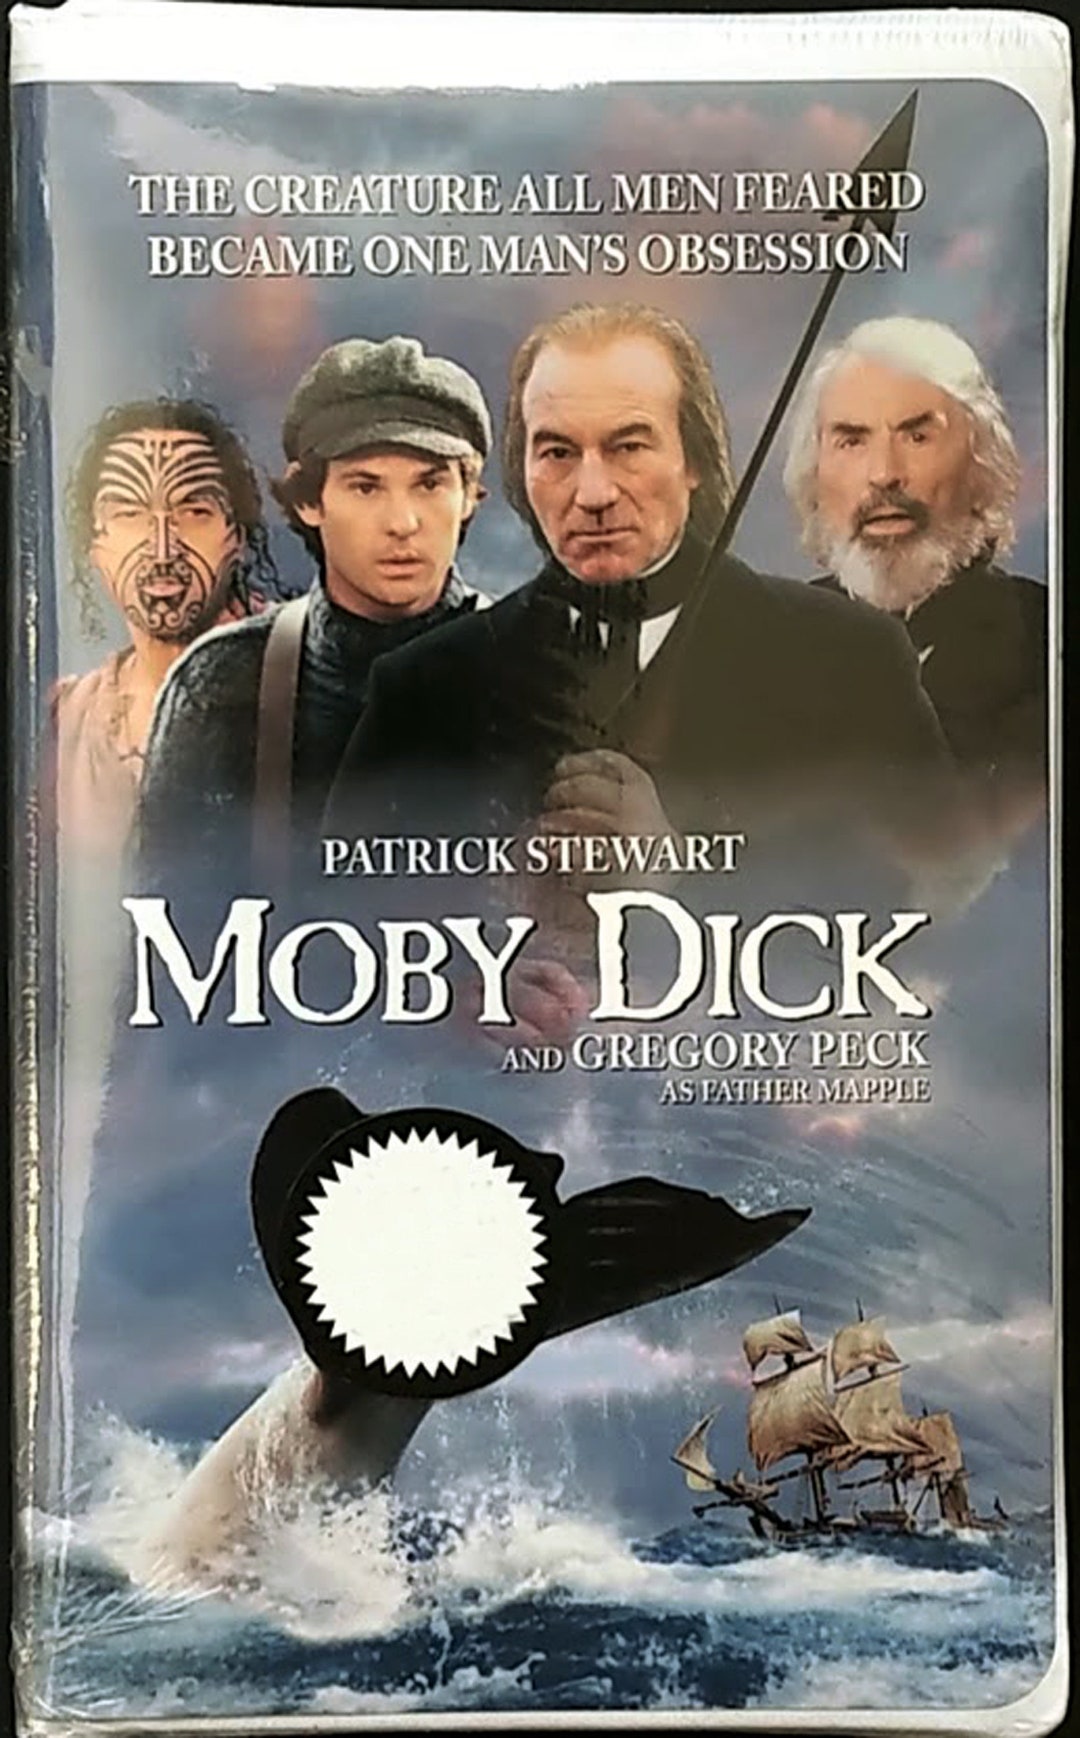 Dick　Sealed　Etsy　VHS　1998　Mini-Series　Moby　TV　Factory　NEW　日本